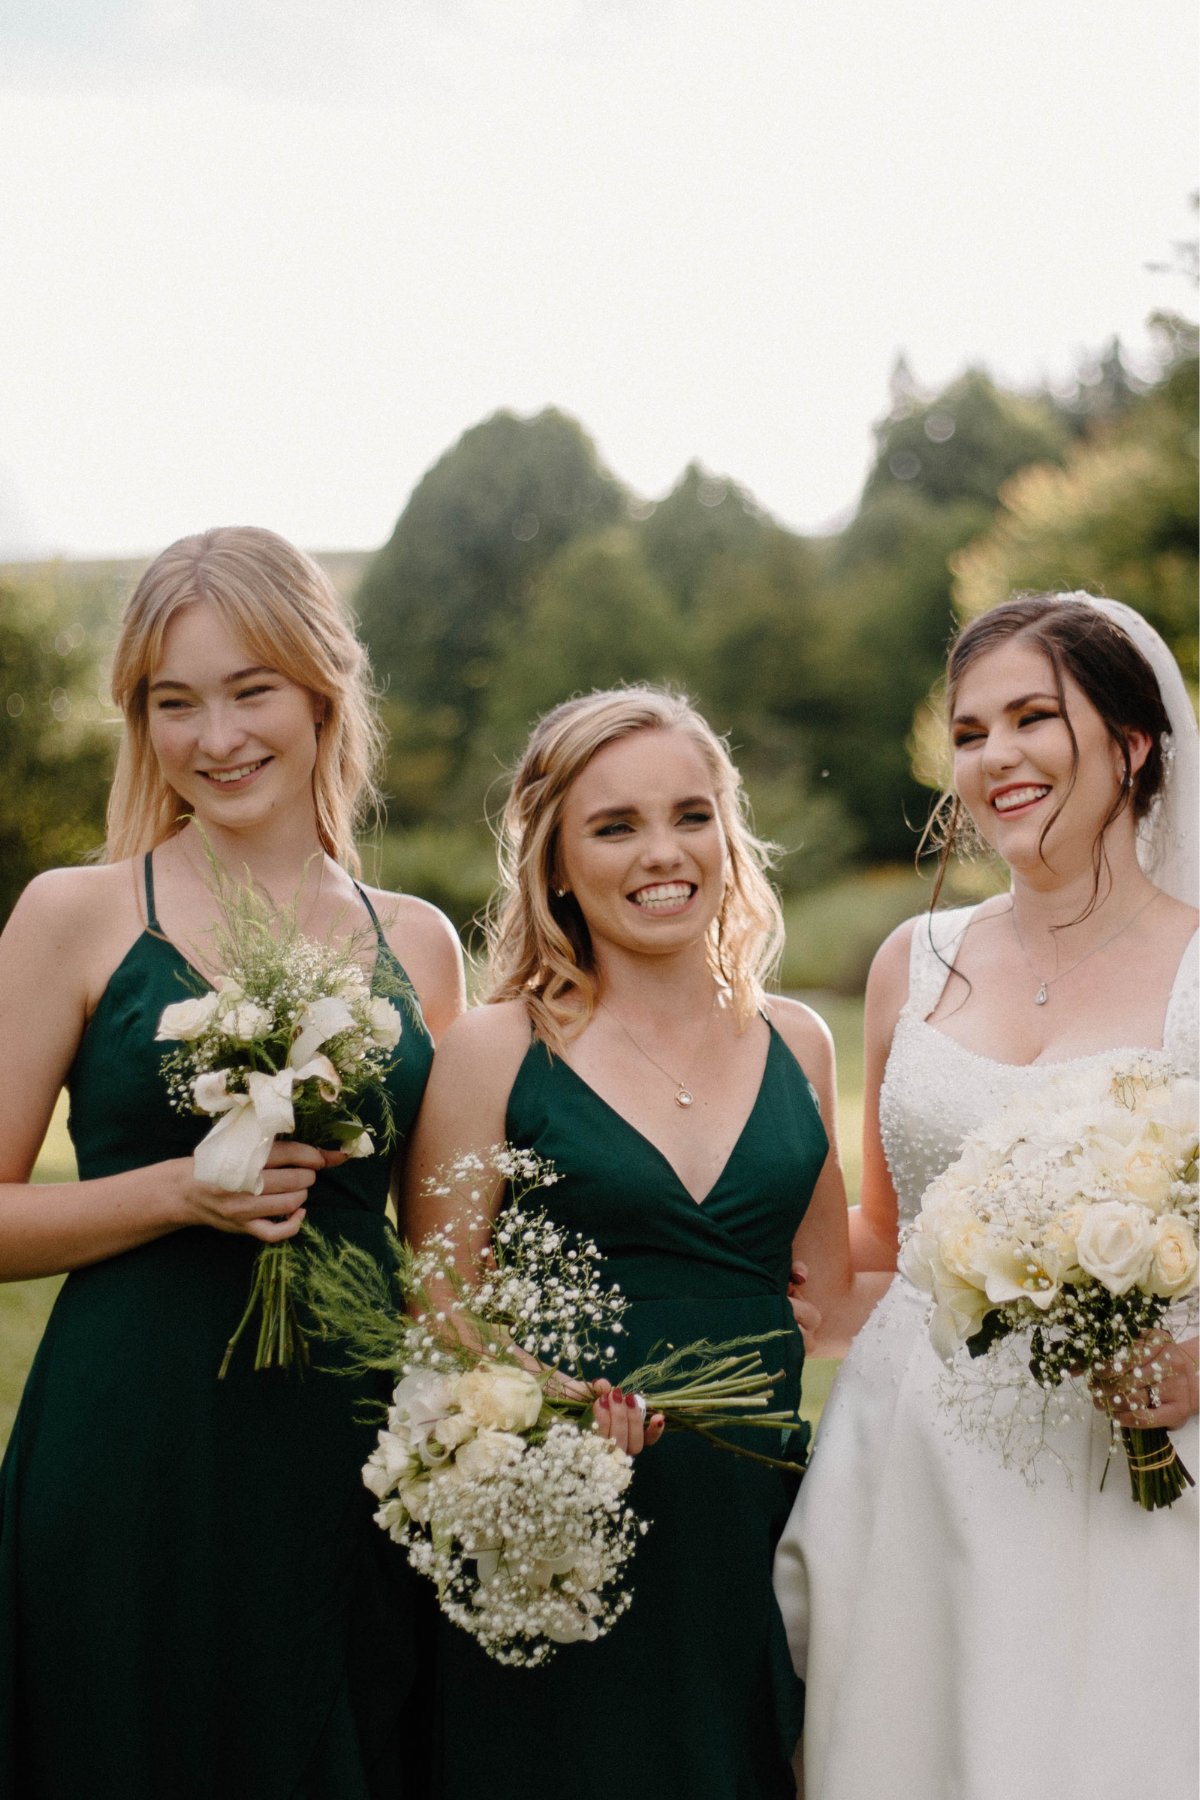 Bridesmaids' Dress Selection & Fitting Party Guide